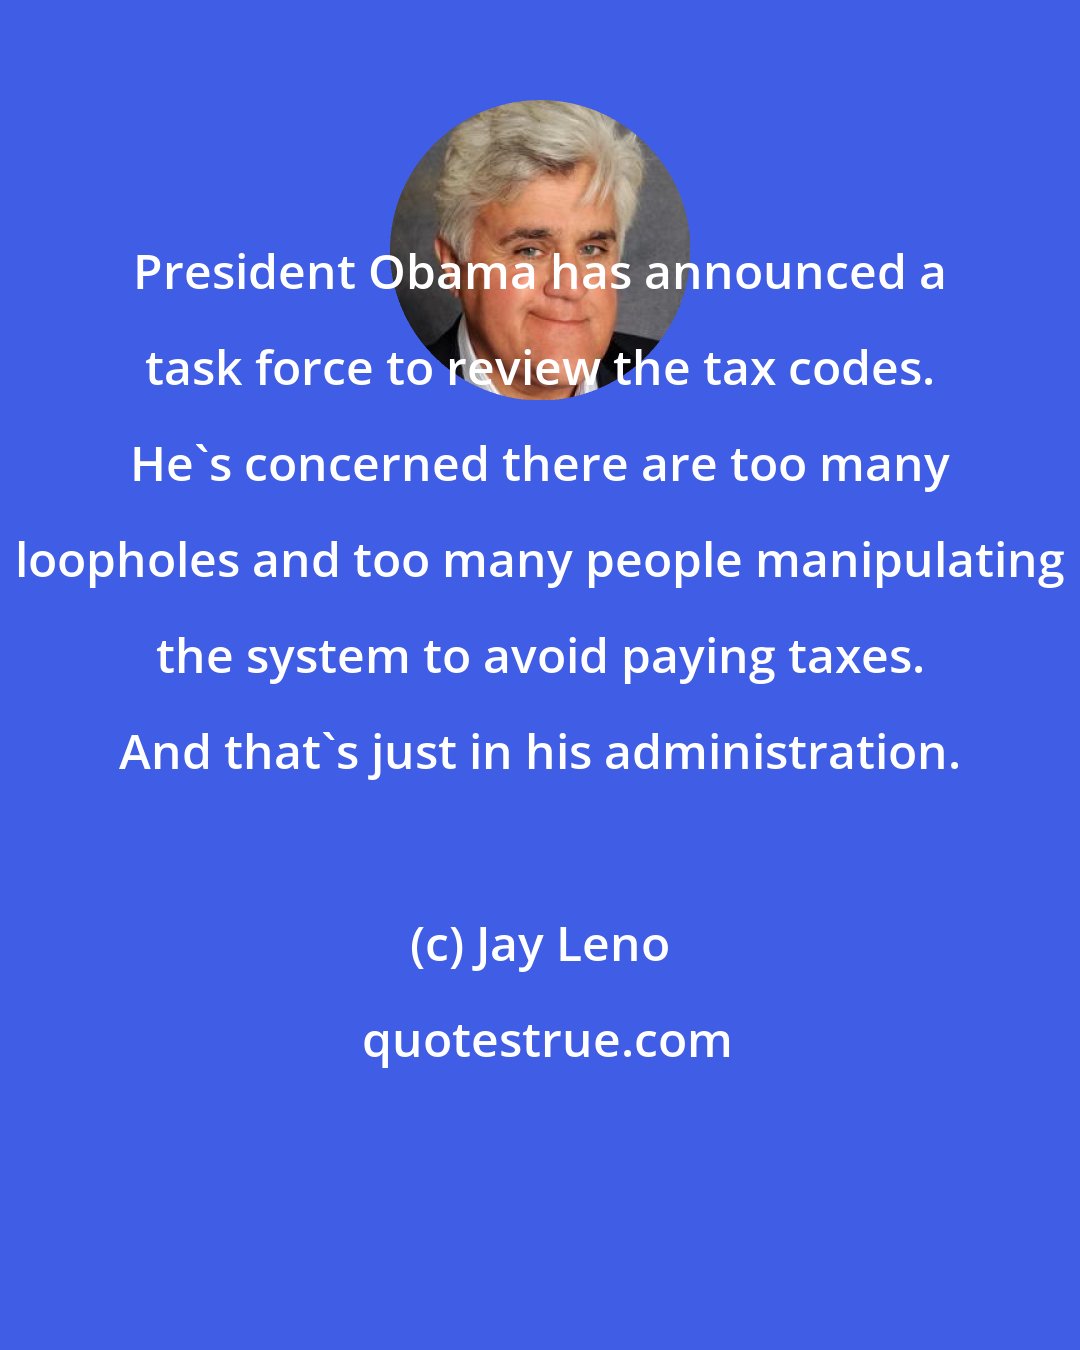 Jay Leno: President Obama has announced a task force to review the tax codes. He's concerned there are too many loopholes and too many people manipulating the system to avoid paying taxes. And that's just in his administration.